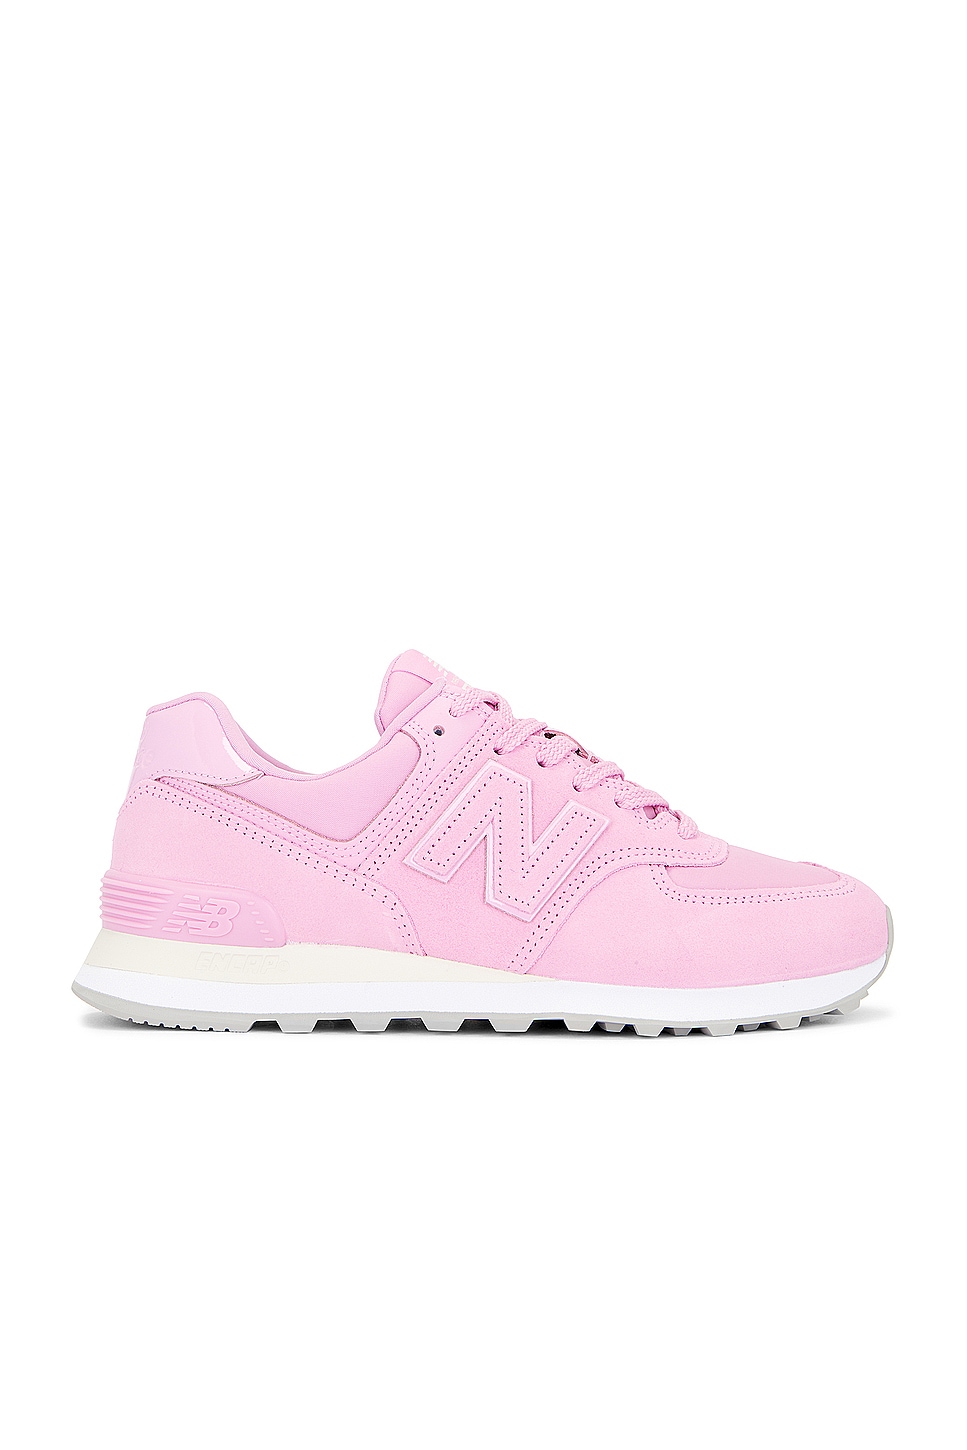 Image 1 of New Balance 574 Sneaker in Pink Sugar